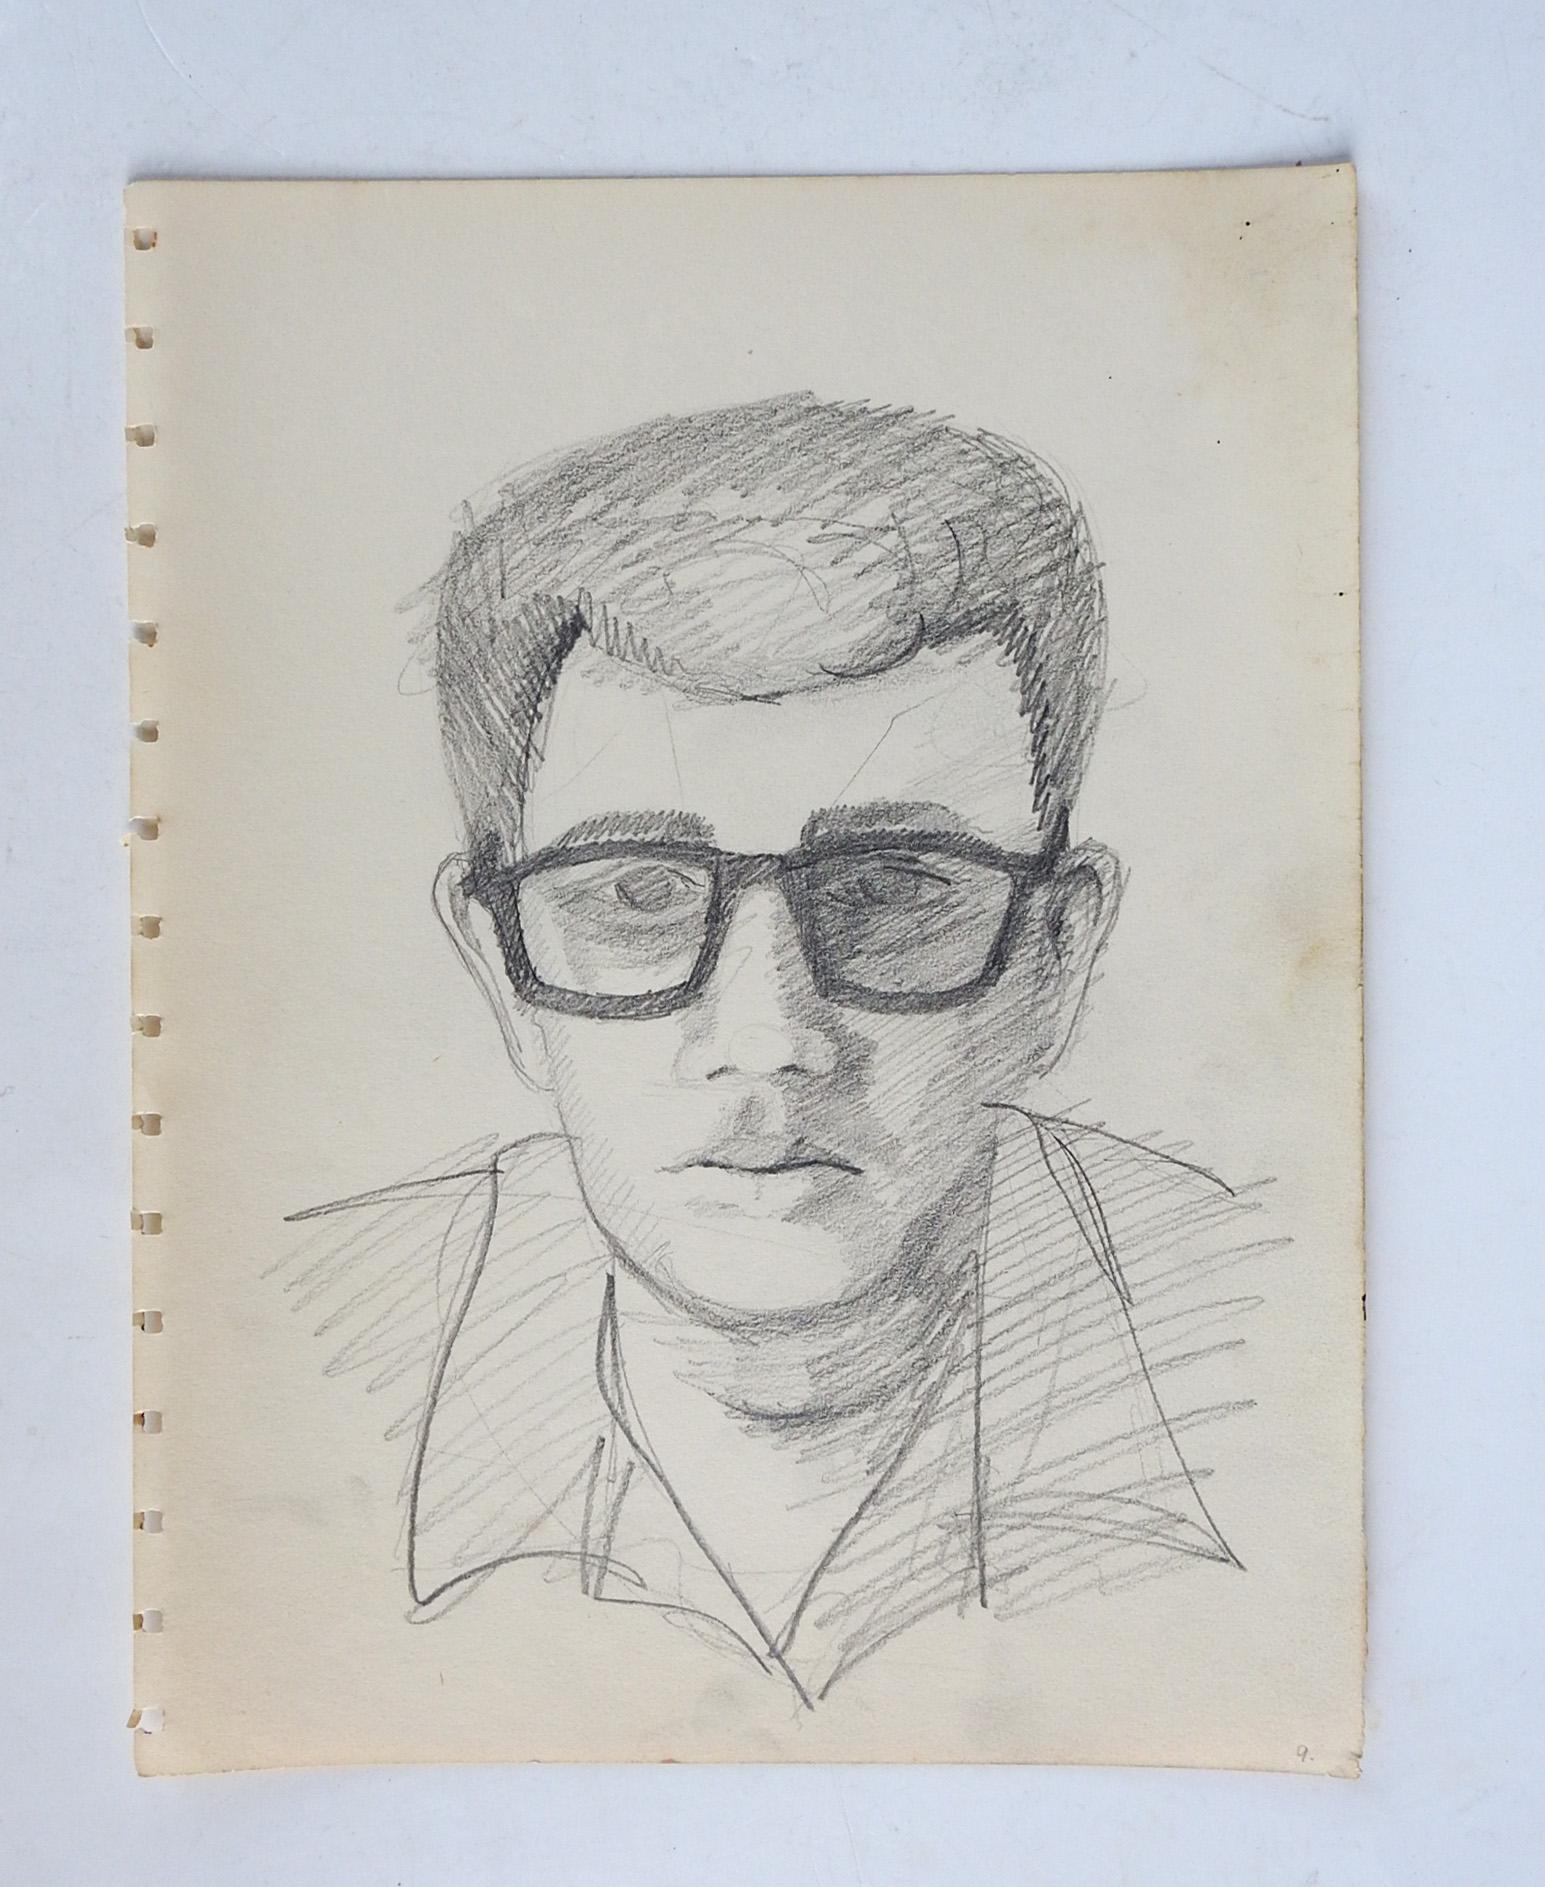 Vintage mid 20th century pencil on paper portrait drawing of man in heavy dark framed glasses. Unsigned. Unframed, age toning, sketch book edge perforations.